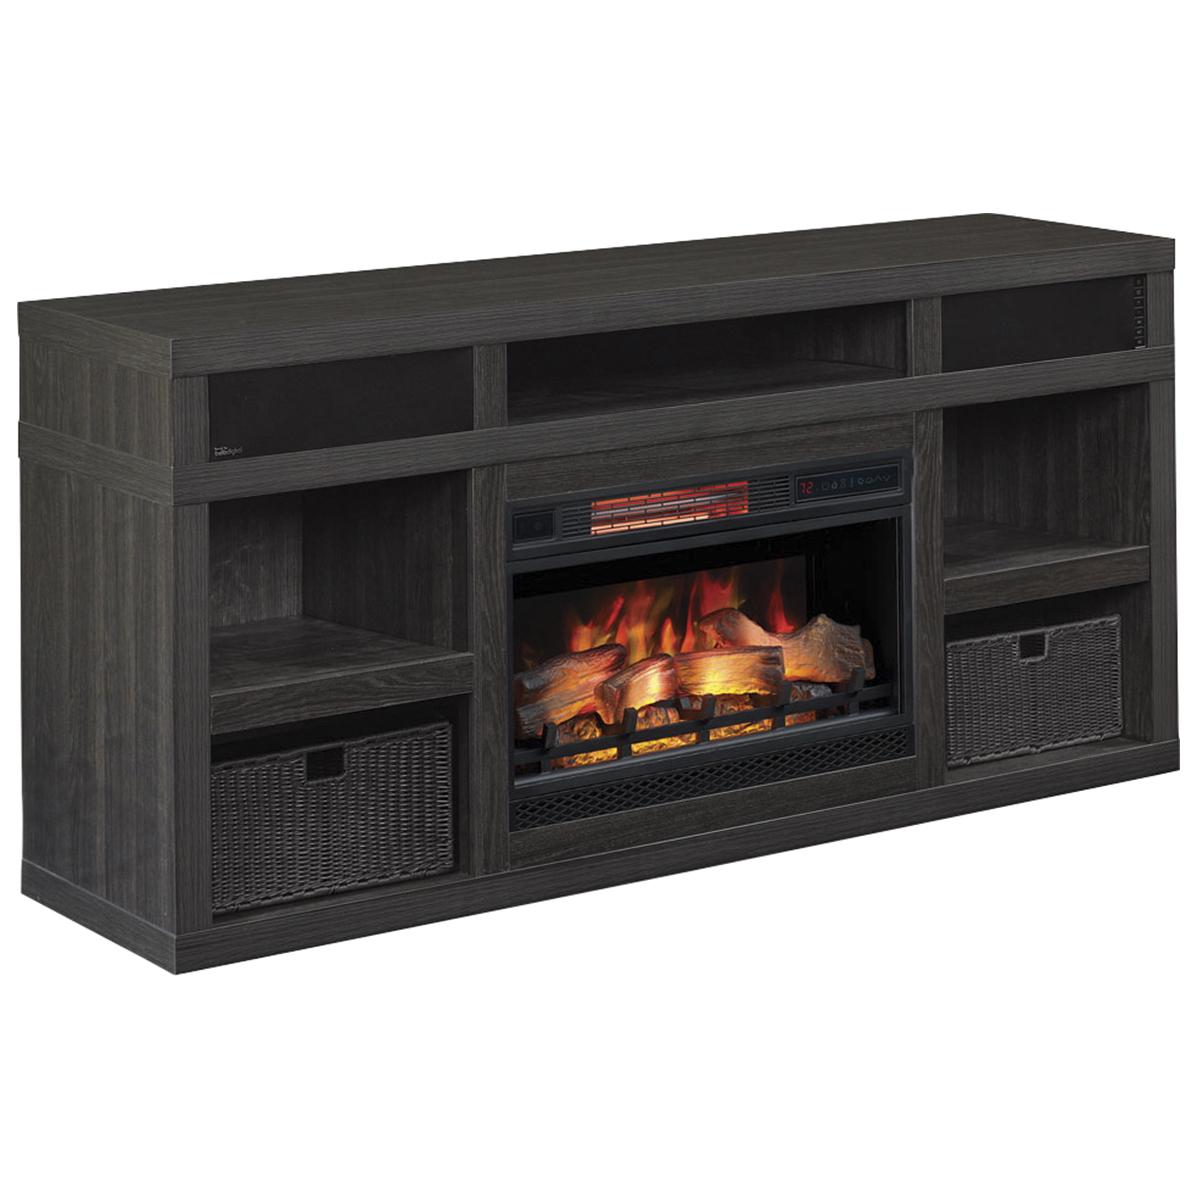 Tv In Front Of Fireplace Beautiful Fabio Flames Greatlin 3 Piece Fireplace Entertainment Wall